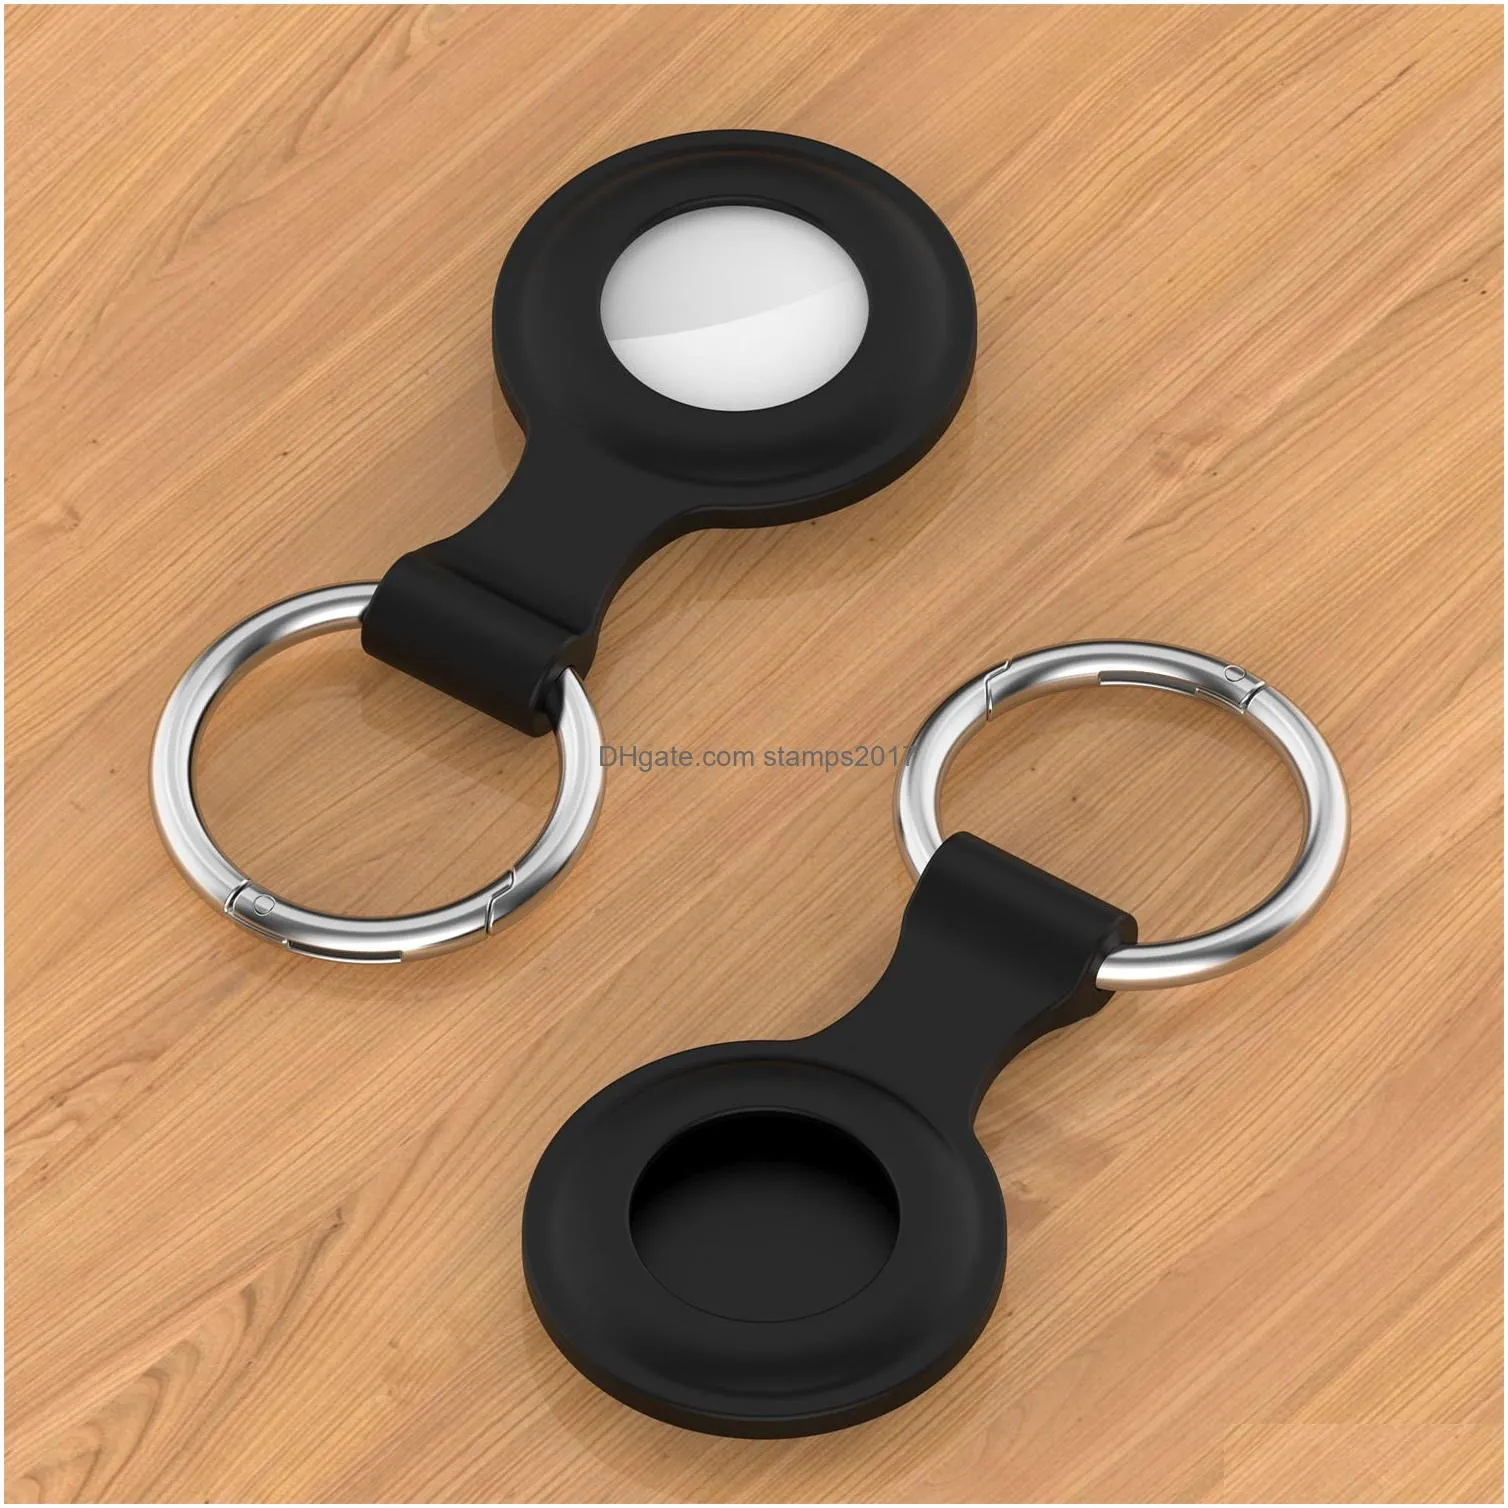 Other Home Decor Soft Tpu Sile Protective Cases For Airtag Anti-Lost Device Finder Keychain Tracker Protect Er With Buckle Scratch R Dh9H7